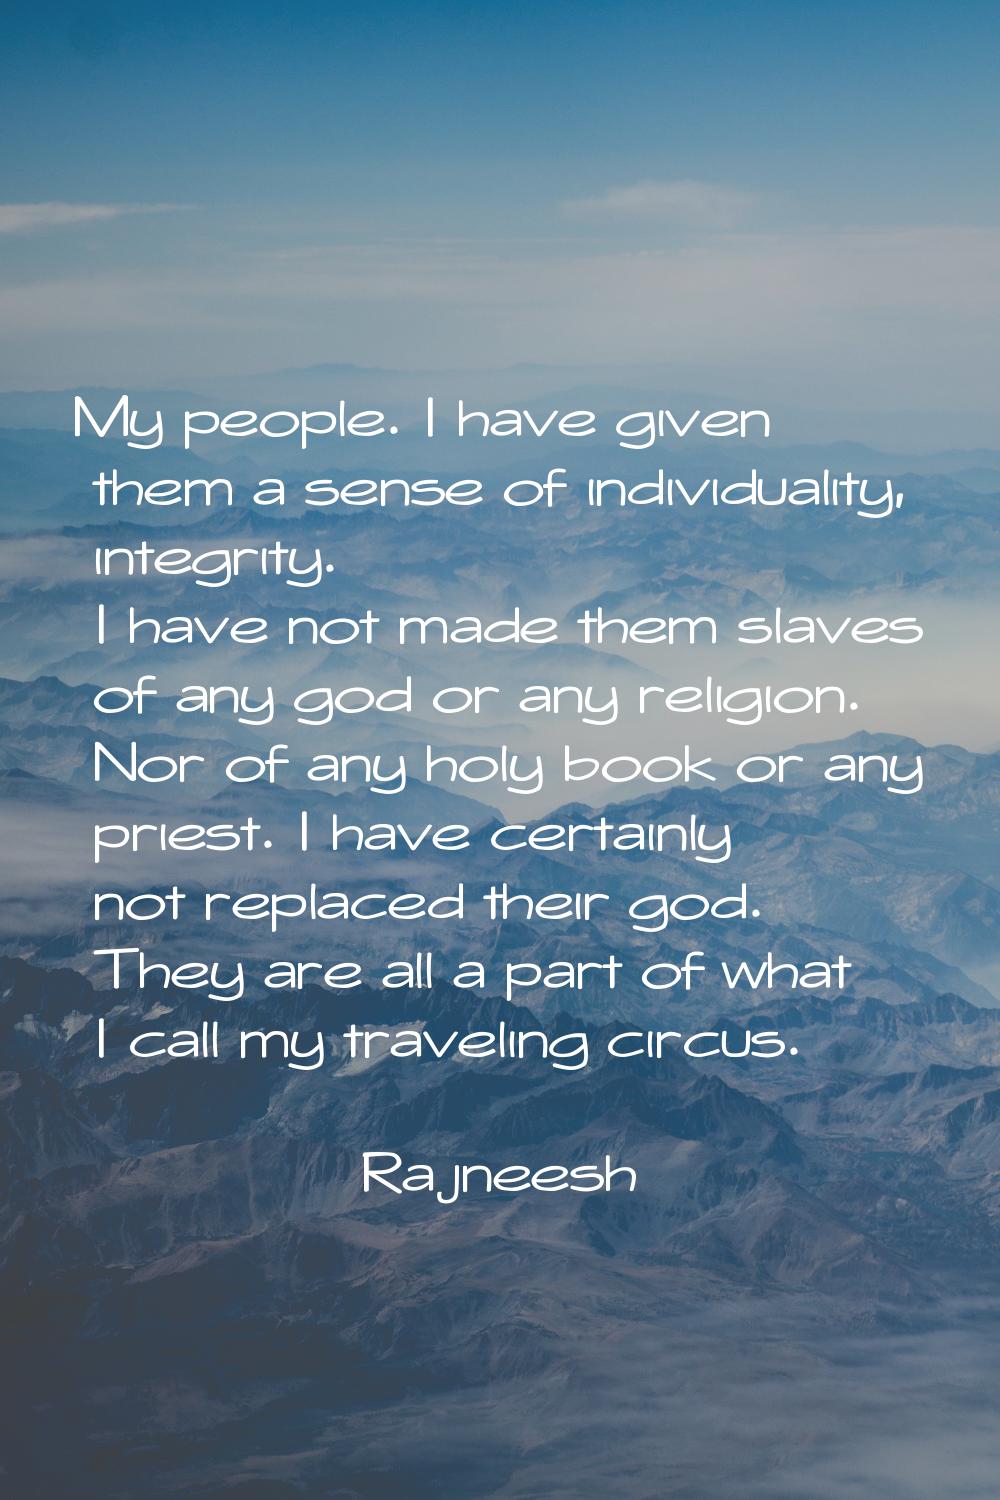 My people. I have given them a sense of individuality, integrity. I have not made them slaves of an